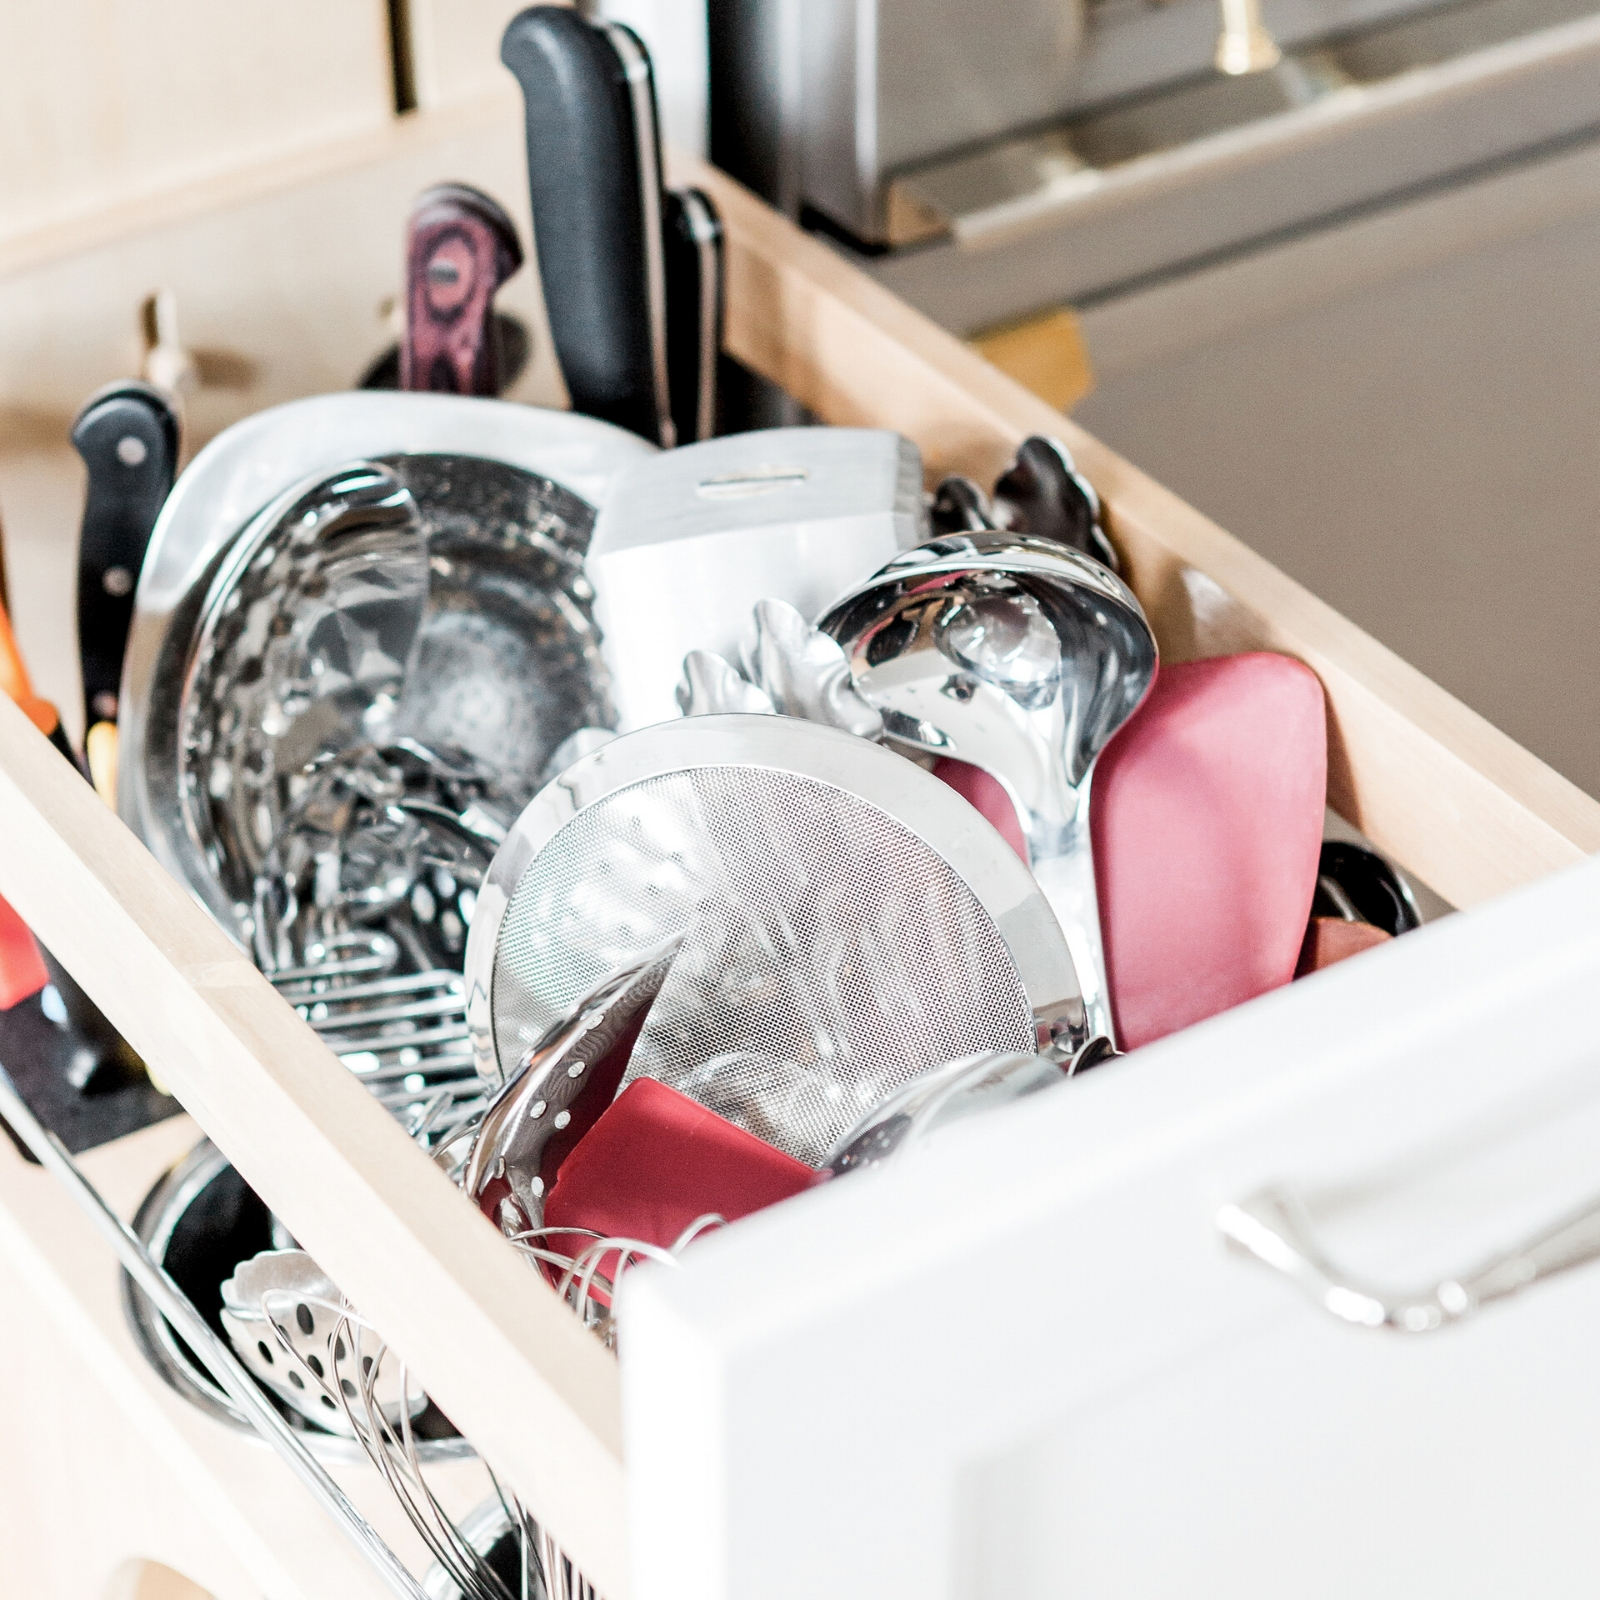 Clutter Free Kitchen Cabinets: 5 Easy Steps to a Kitchen You Enjoy